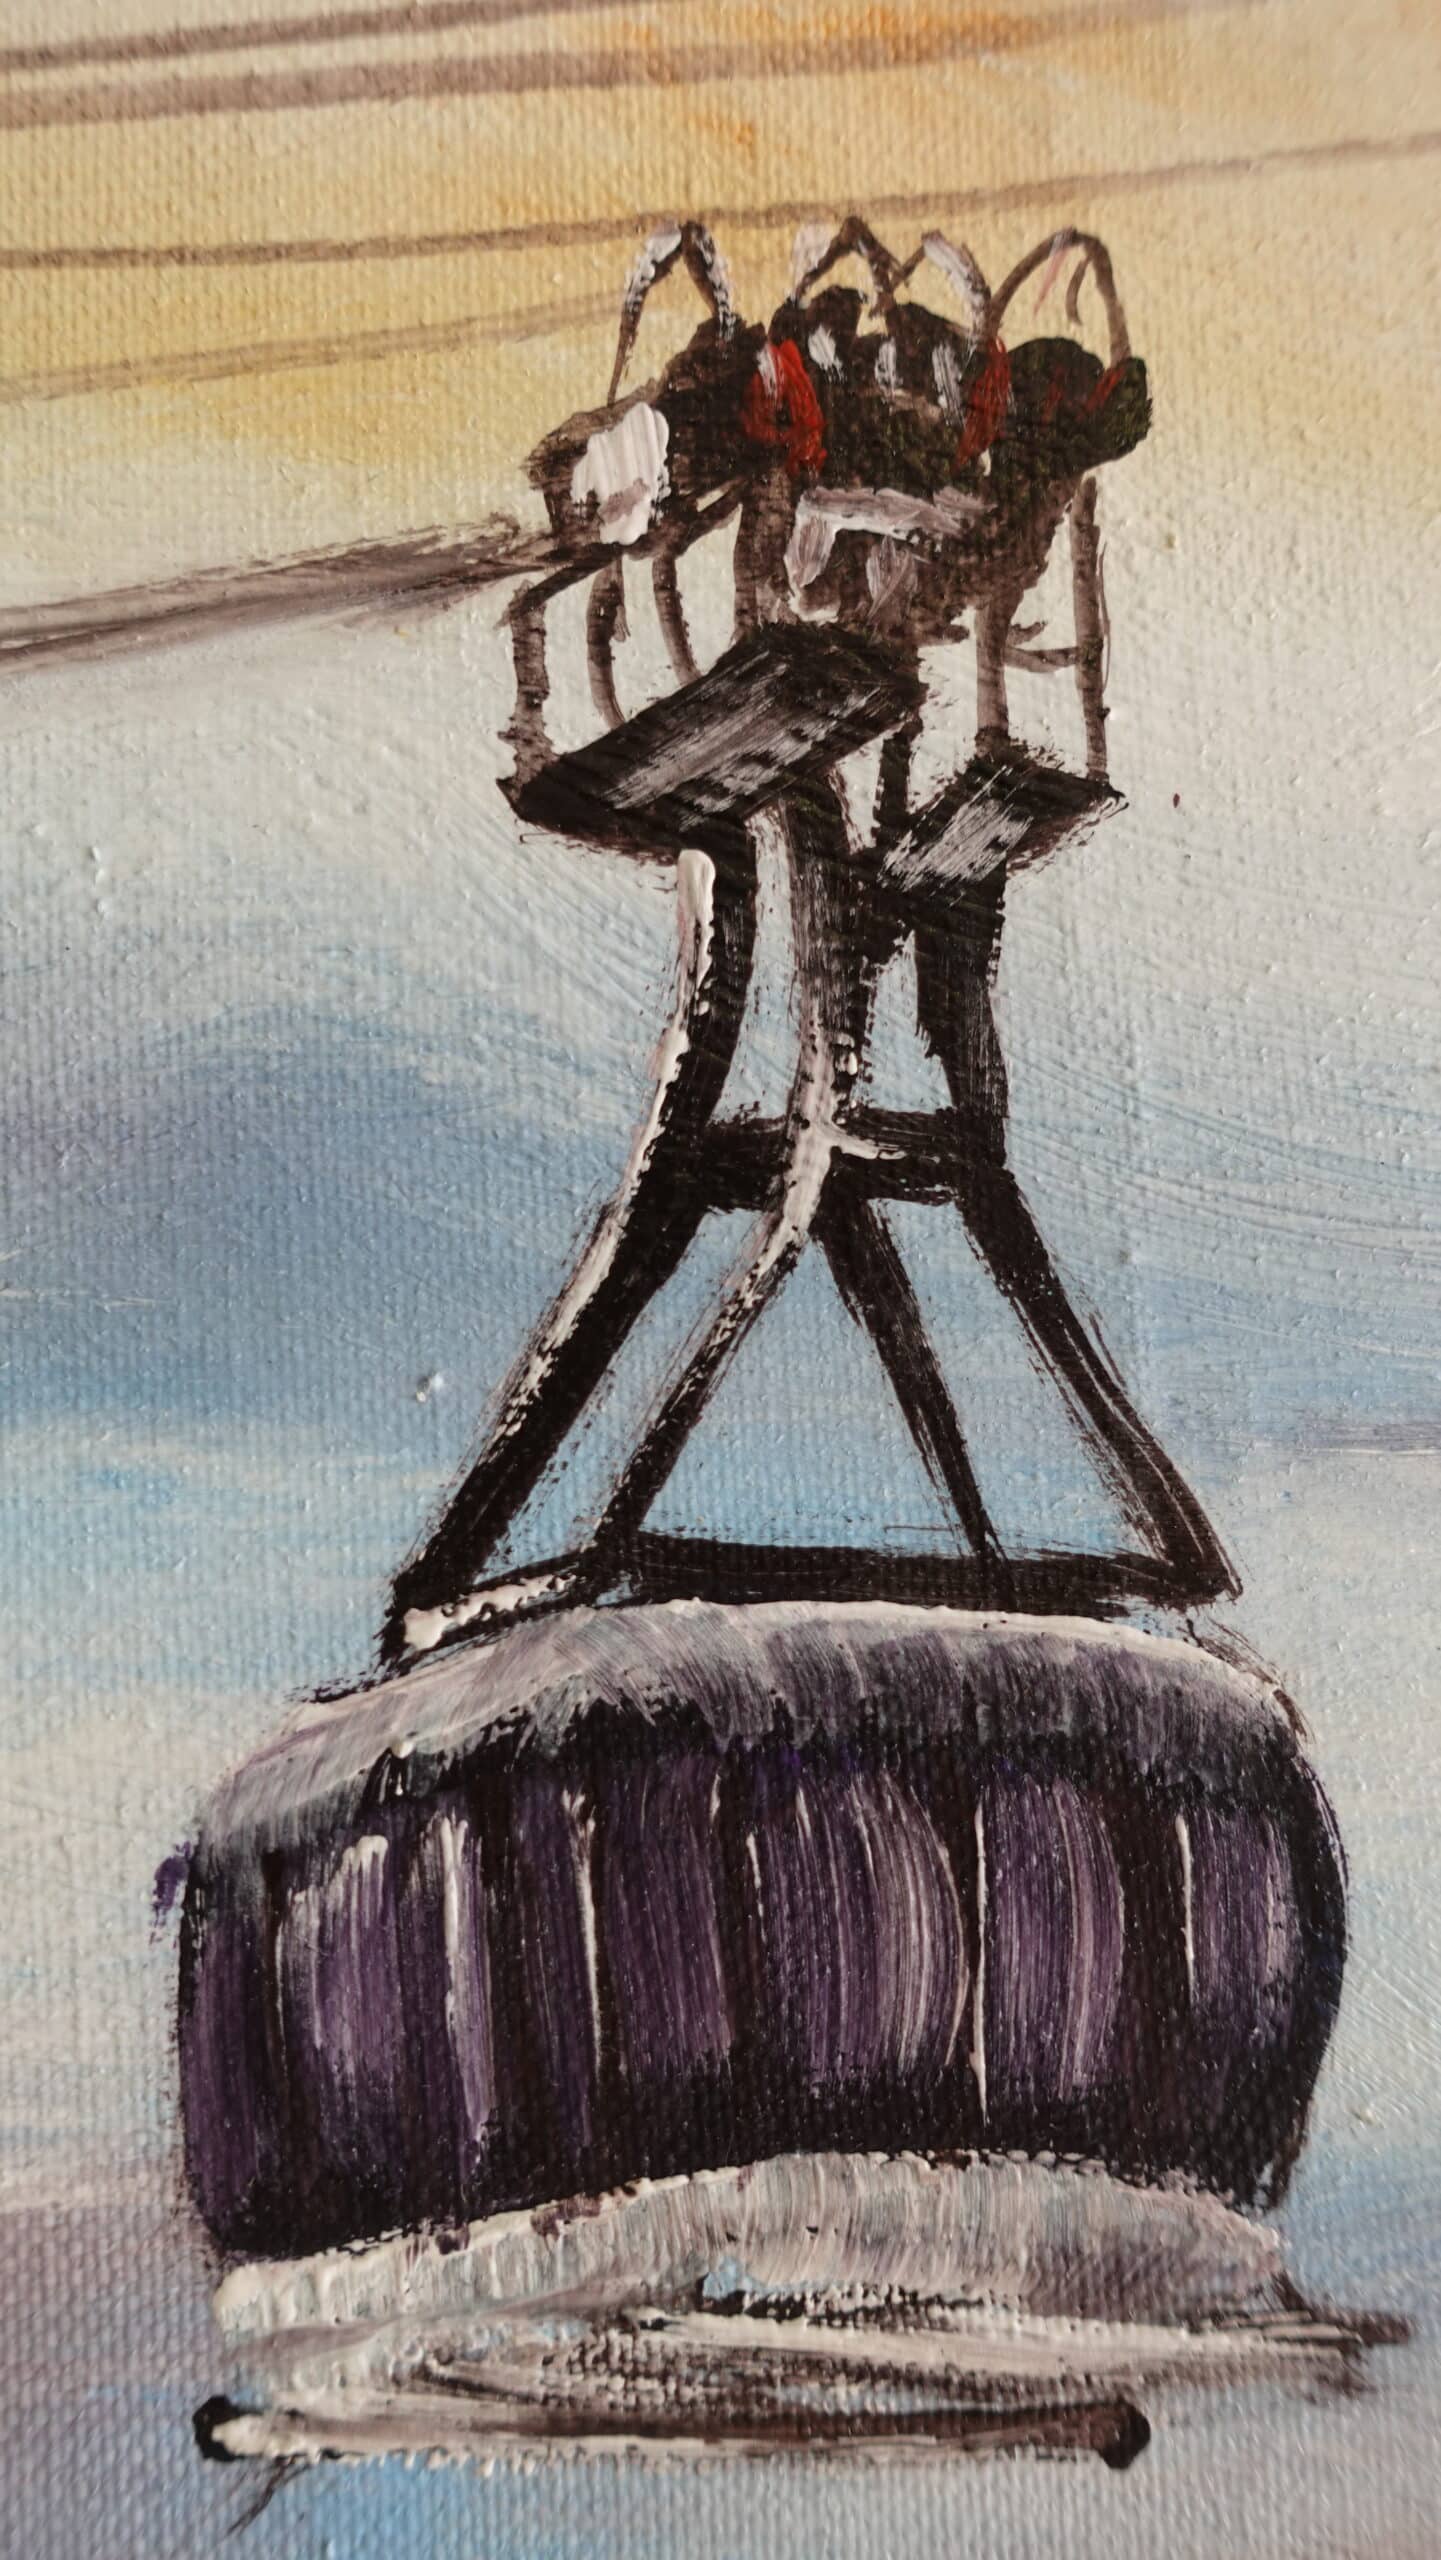 Sugarloaf Chairlift in Rio 60 x 40 cm